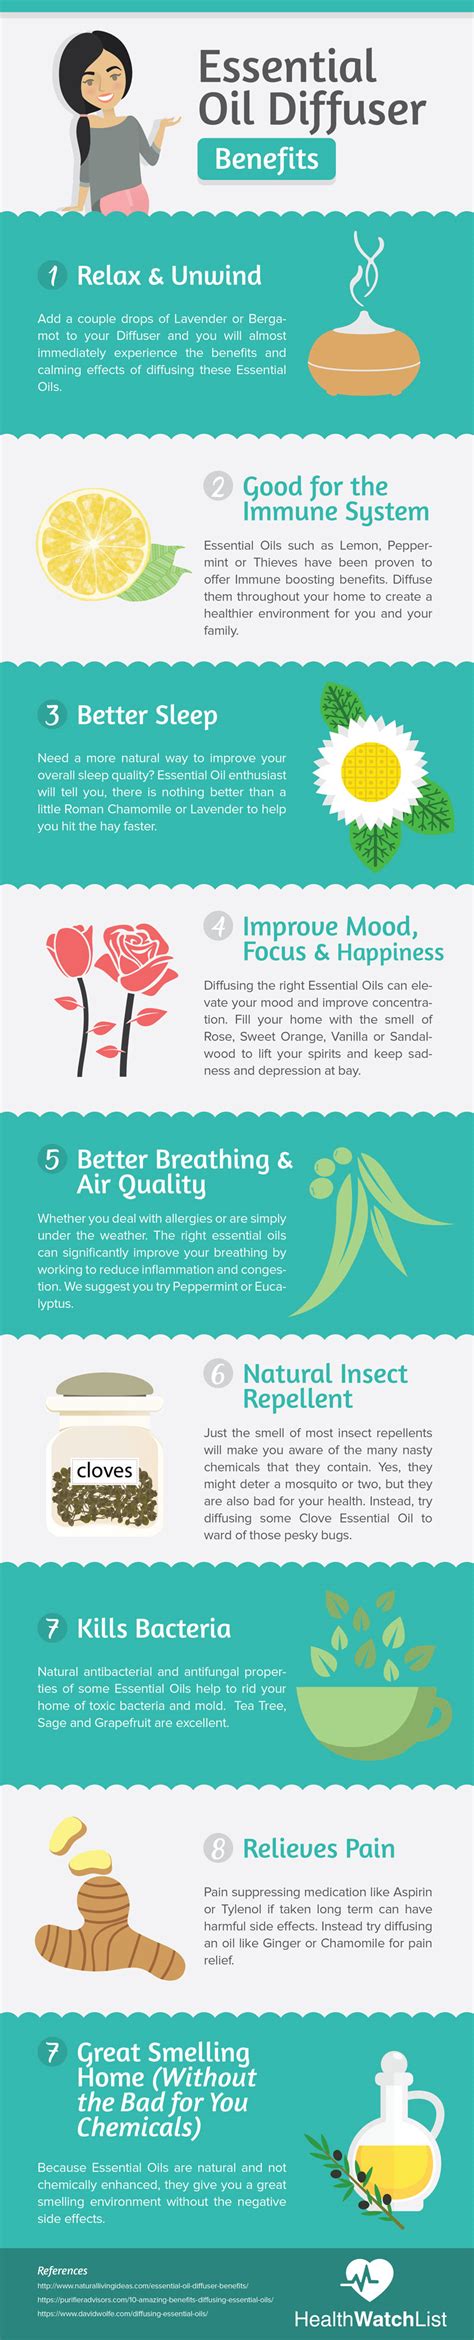 Infographic: Essential Oil Diffuser Benefits - InfographicBee.com